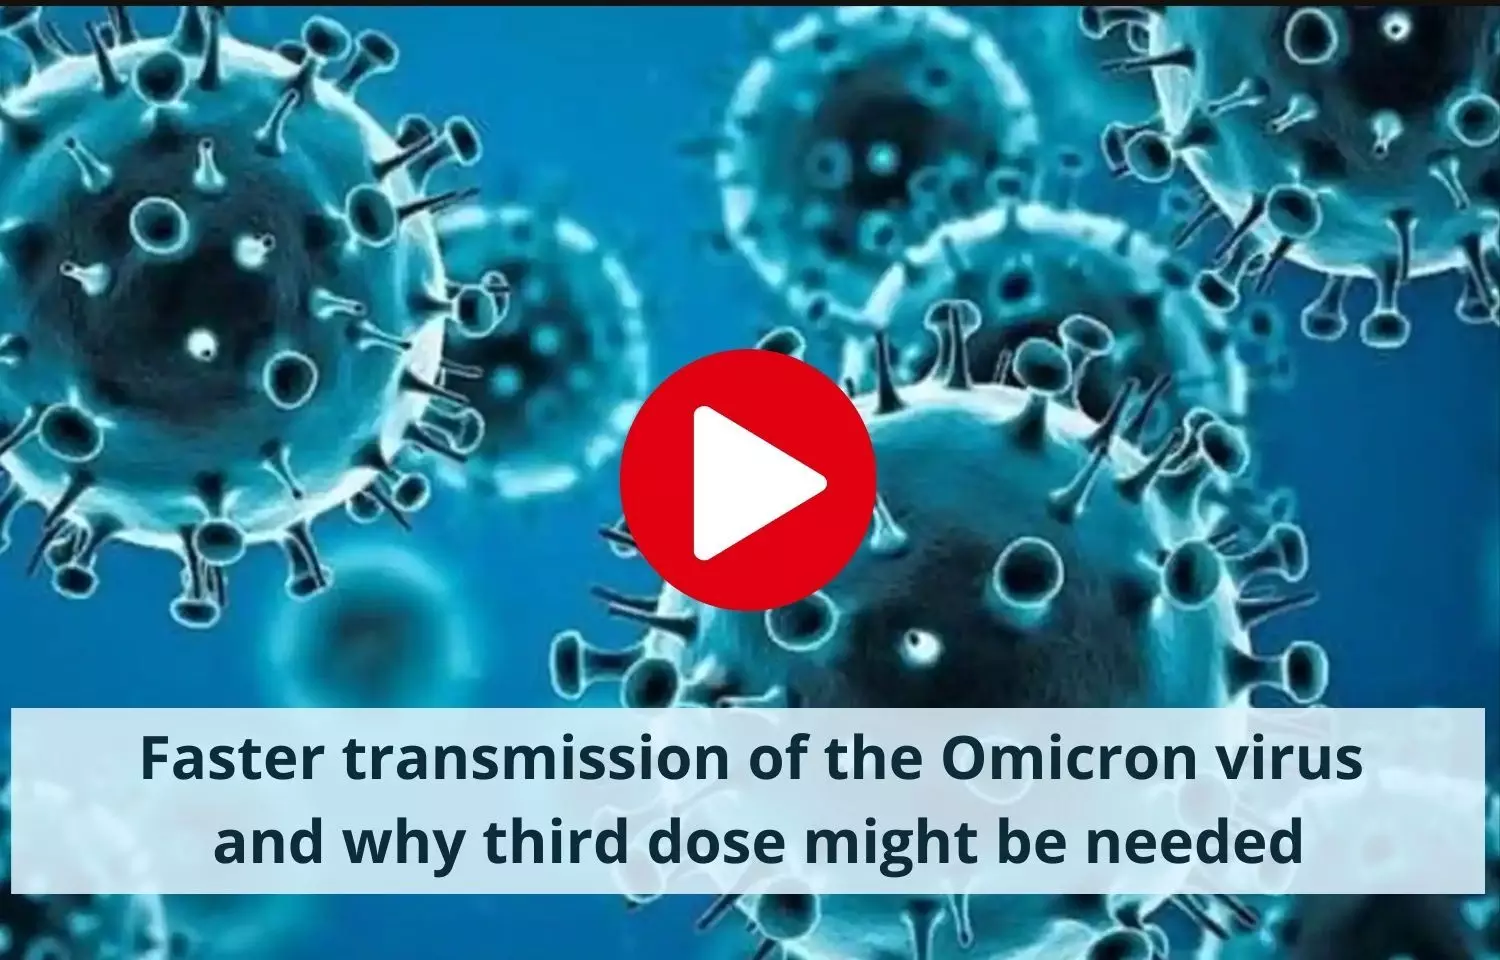 Why third dose might be needed for Omicron?